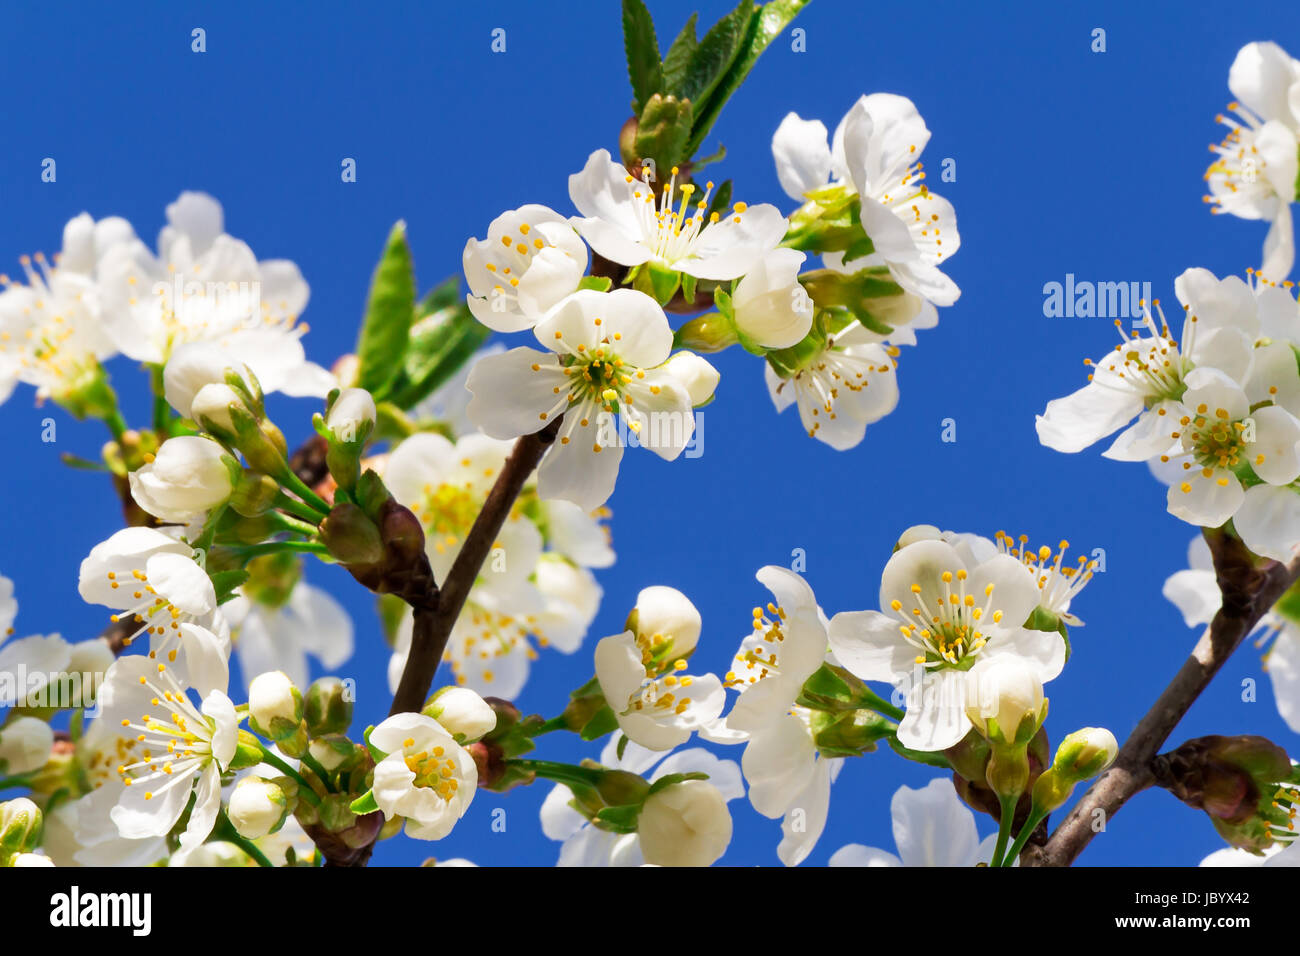 Cherry branch with a large number of white flowers against the blue sky. Stock Photo